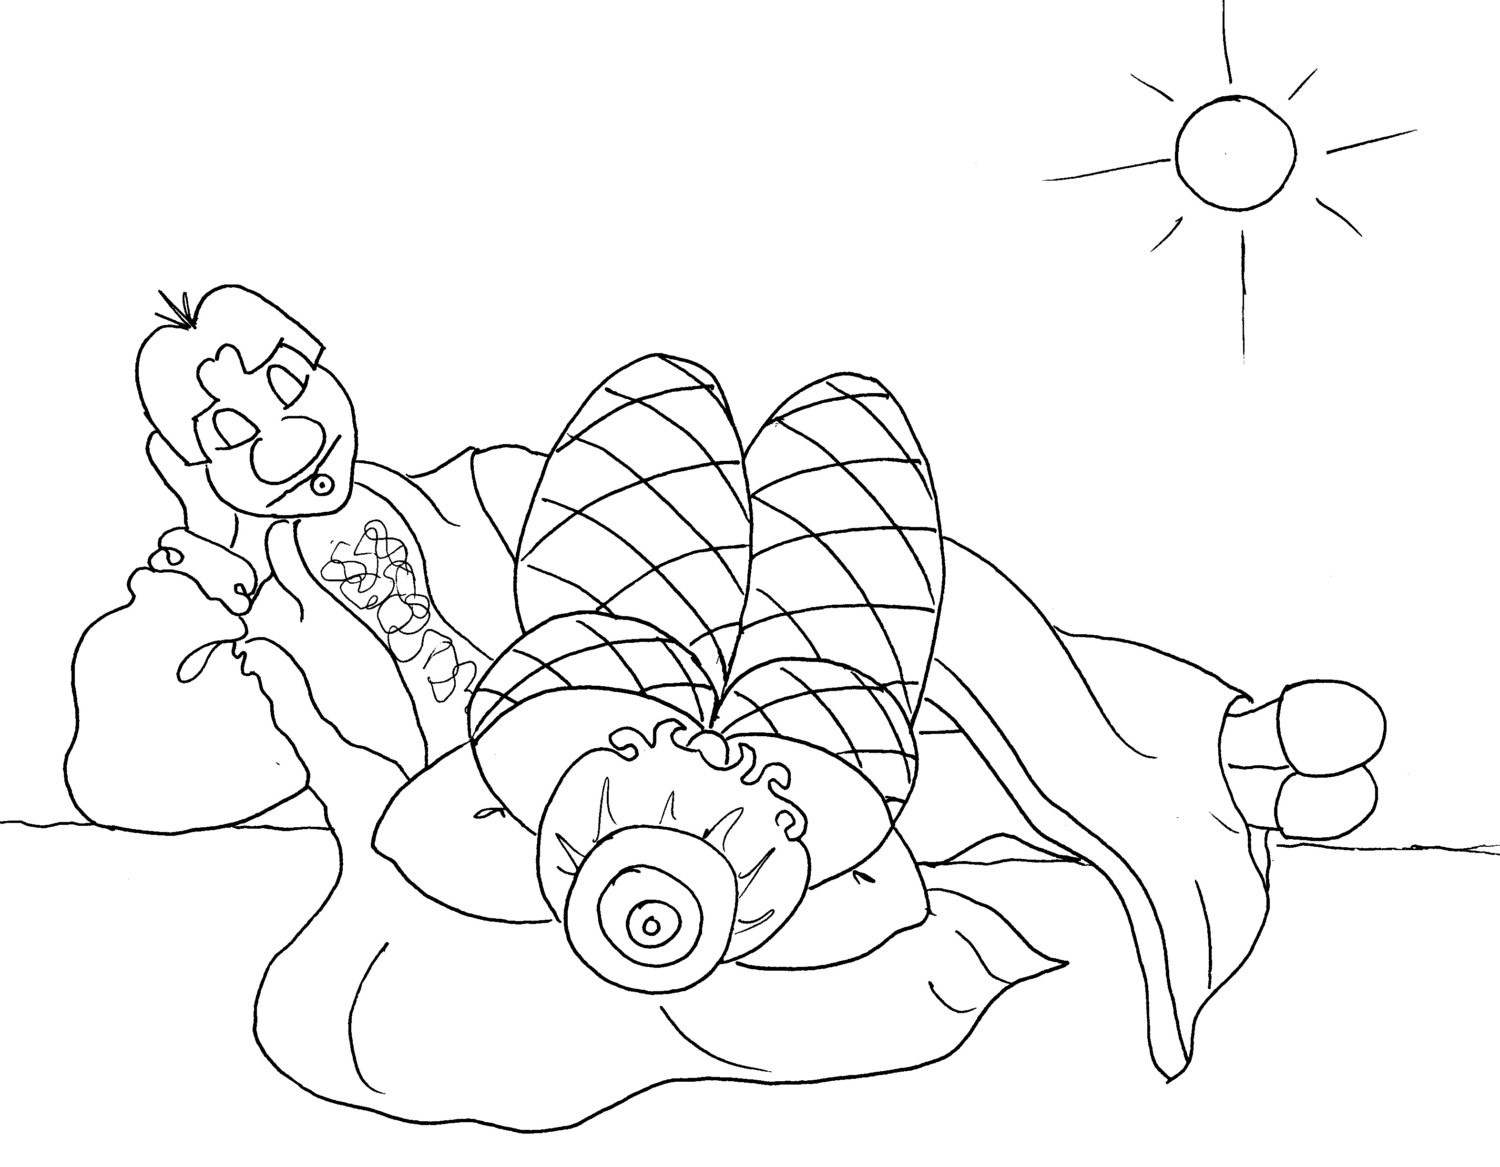 Kama Sutra Coloring Book
 Afternoon Delight Kama Sutra Adult Coloring Page from Chubby